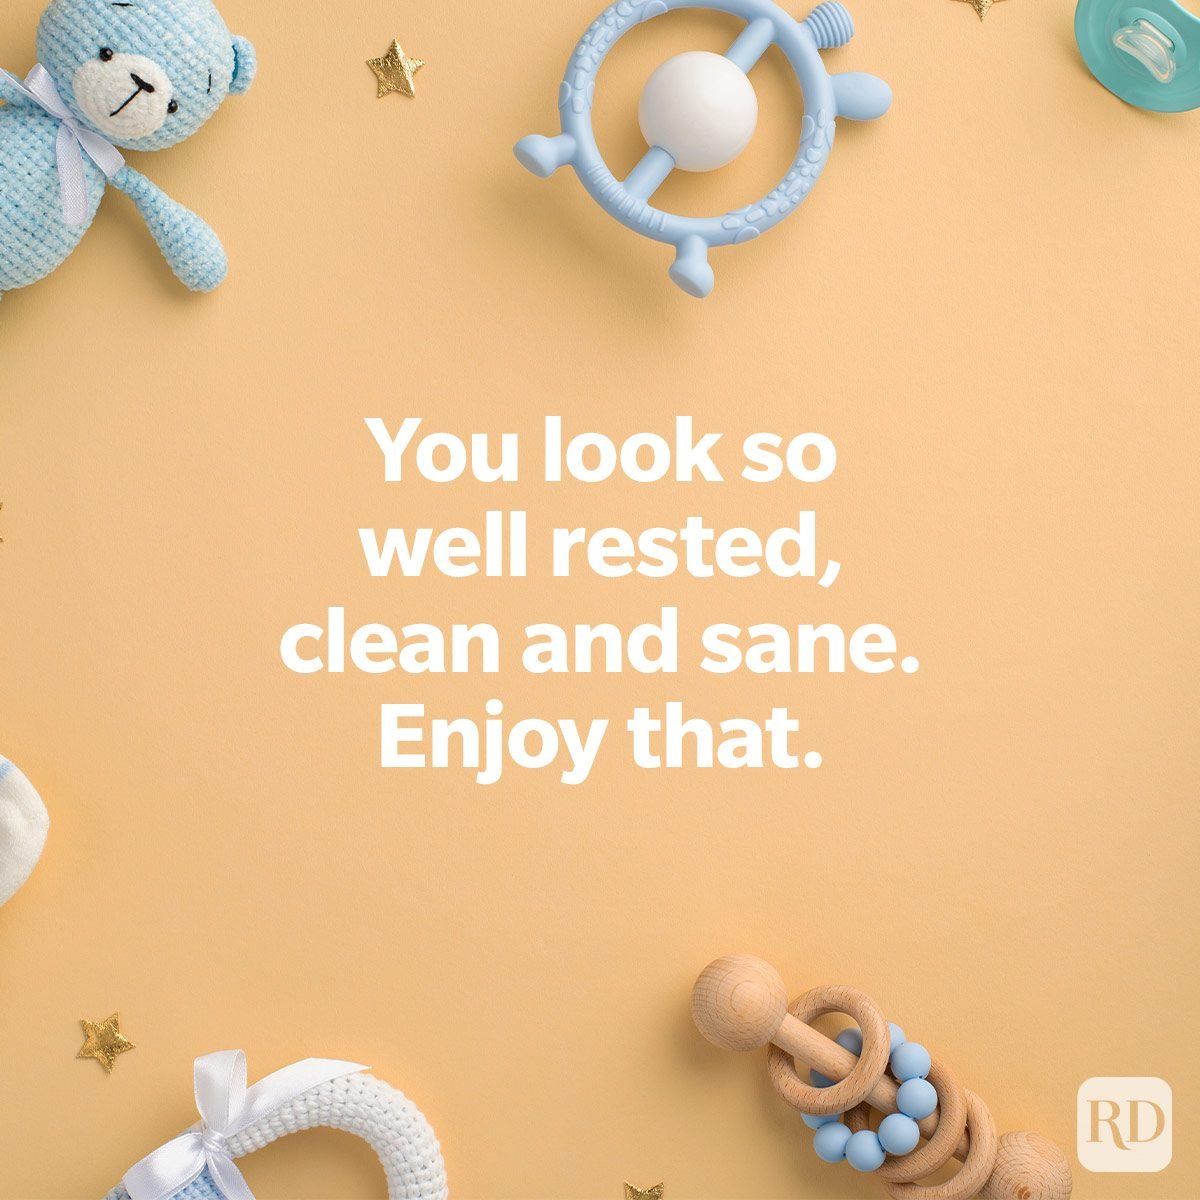 sweet baby wishes to send to expectant parents on baby toys and items background flat lay You look so well rested, clean and sane. Enjoy that.